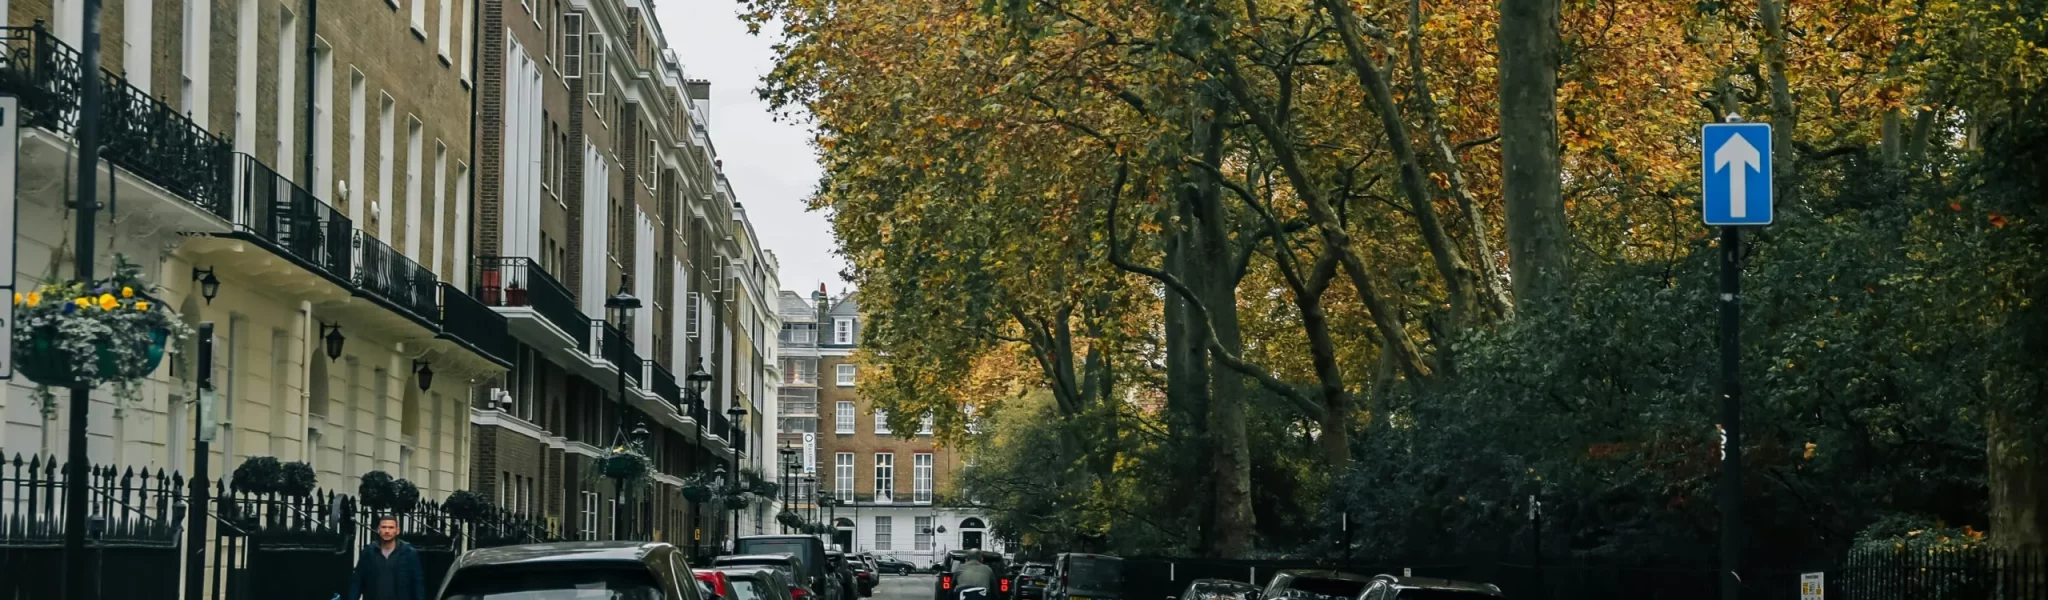 A tree-lined street in central London.